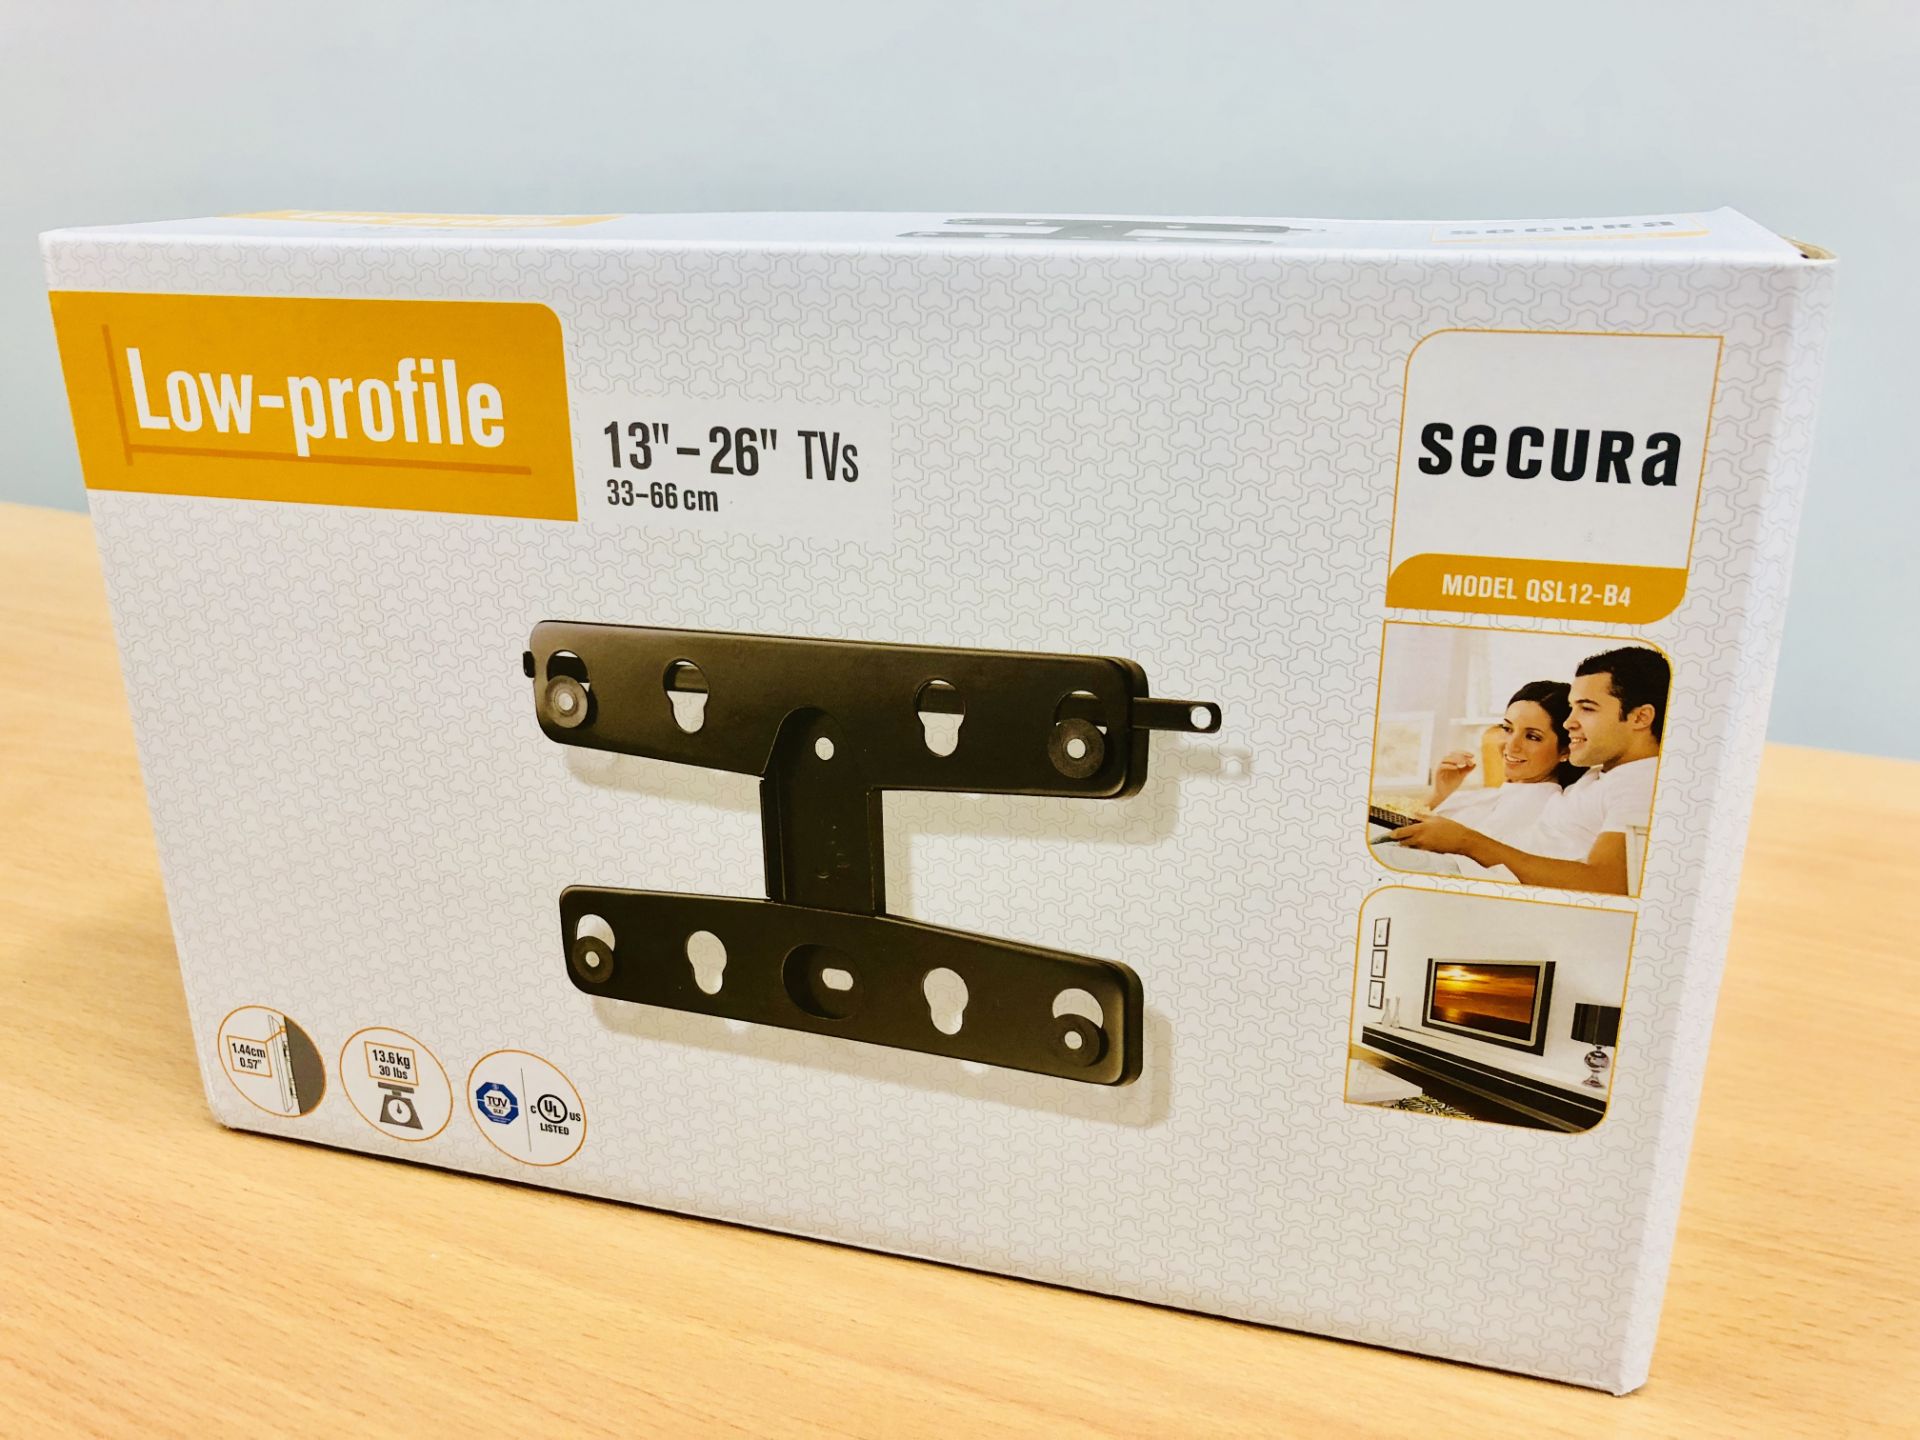 V Brand New Secura Low Profile Ultra Slim TV Wall Mount For Models 13"-26" - Online Price £28.06 (